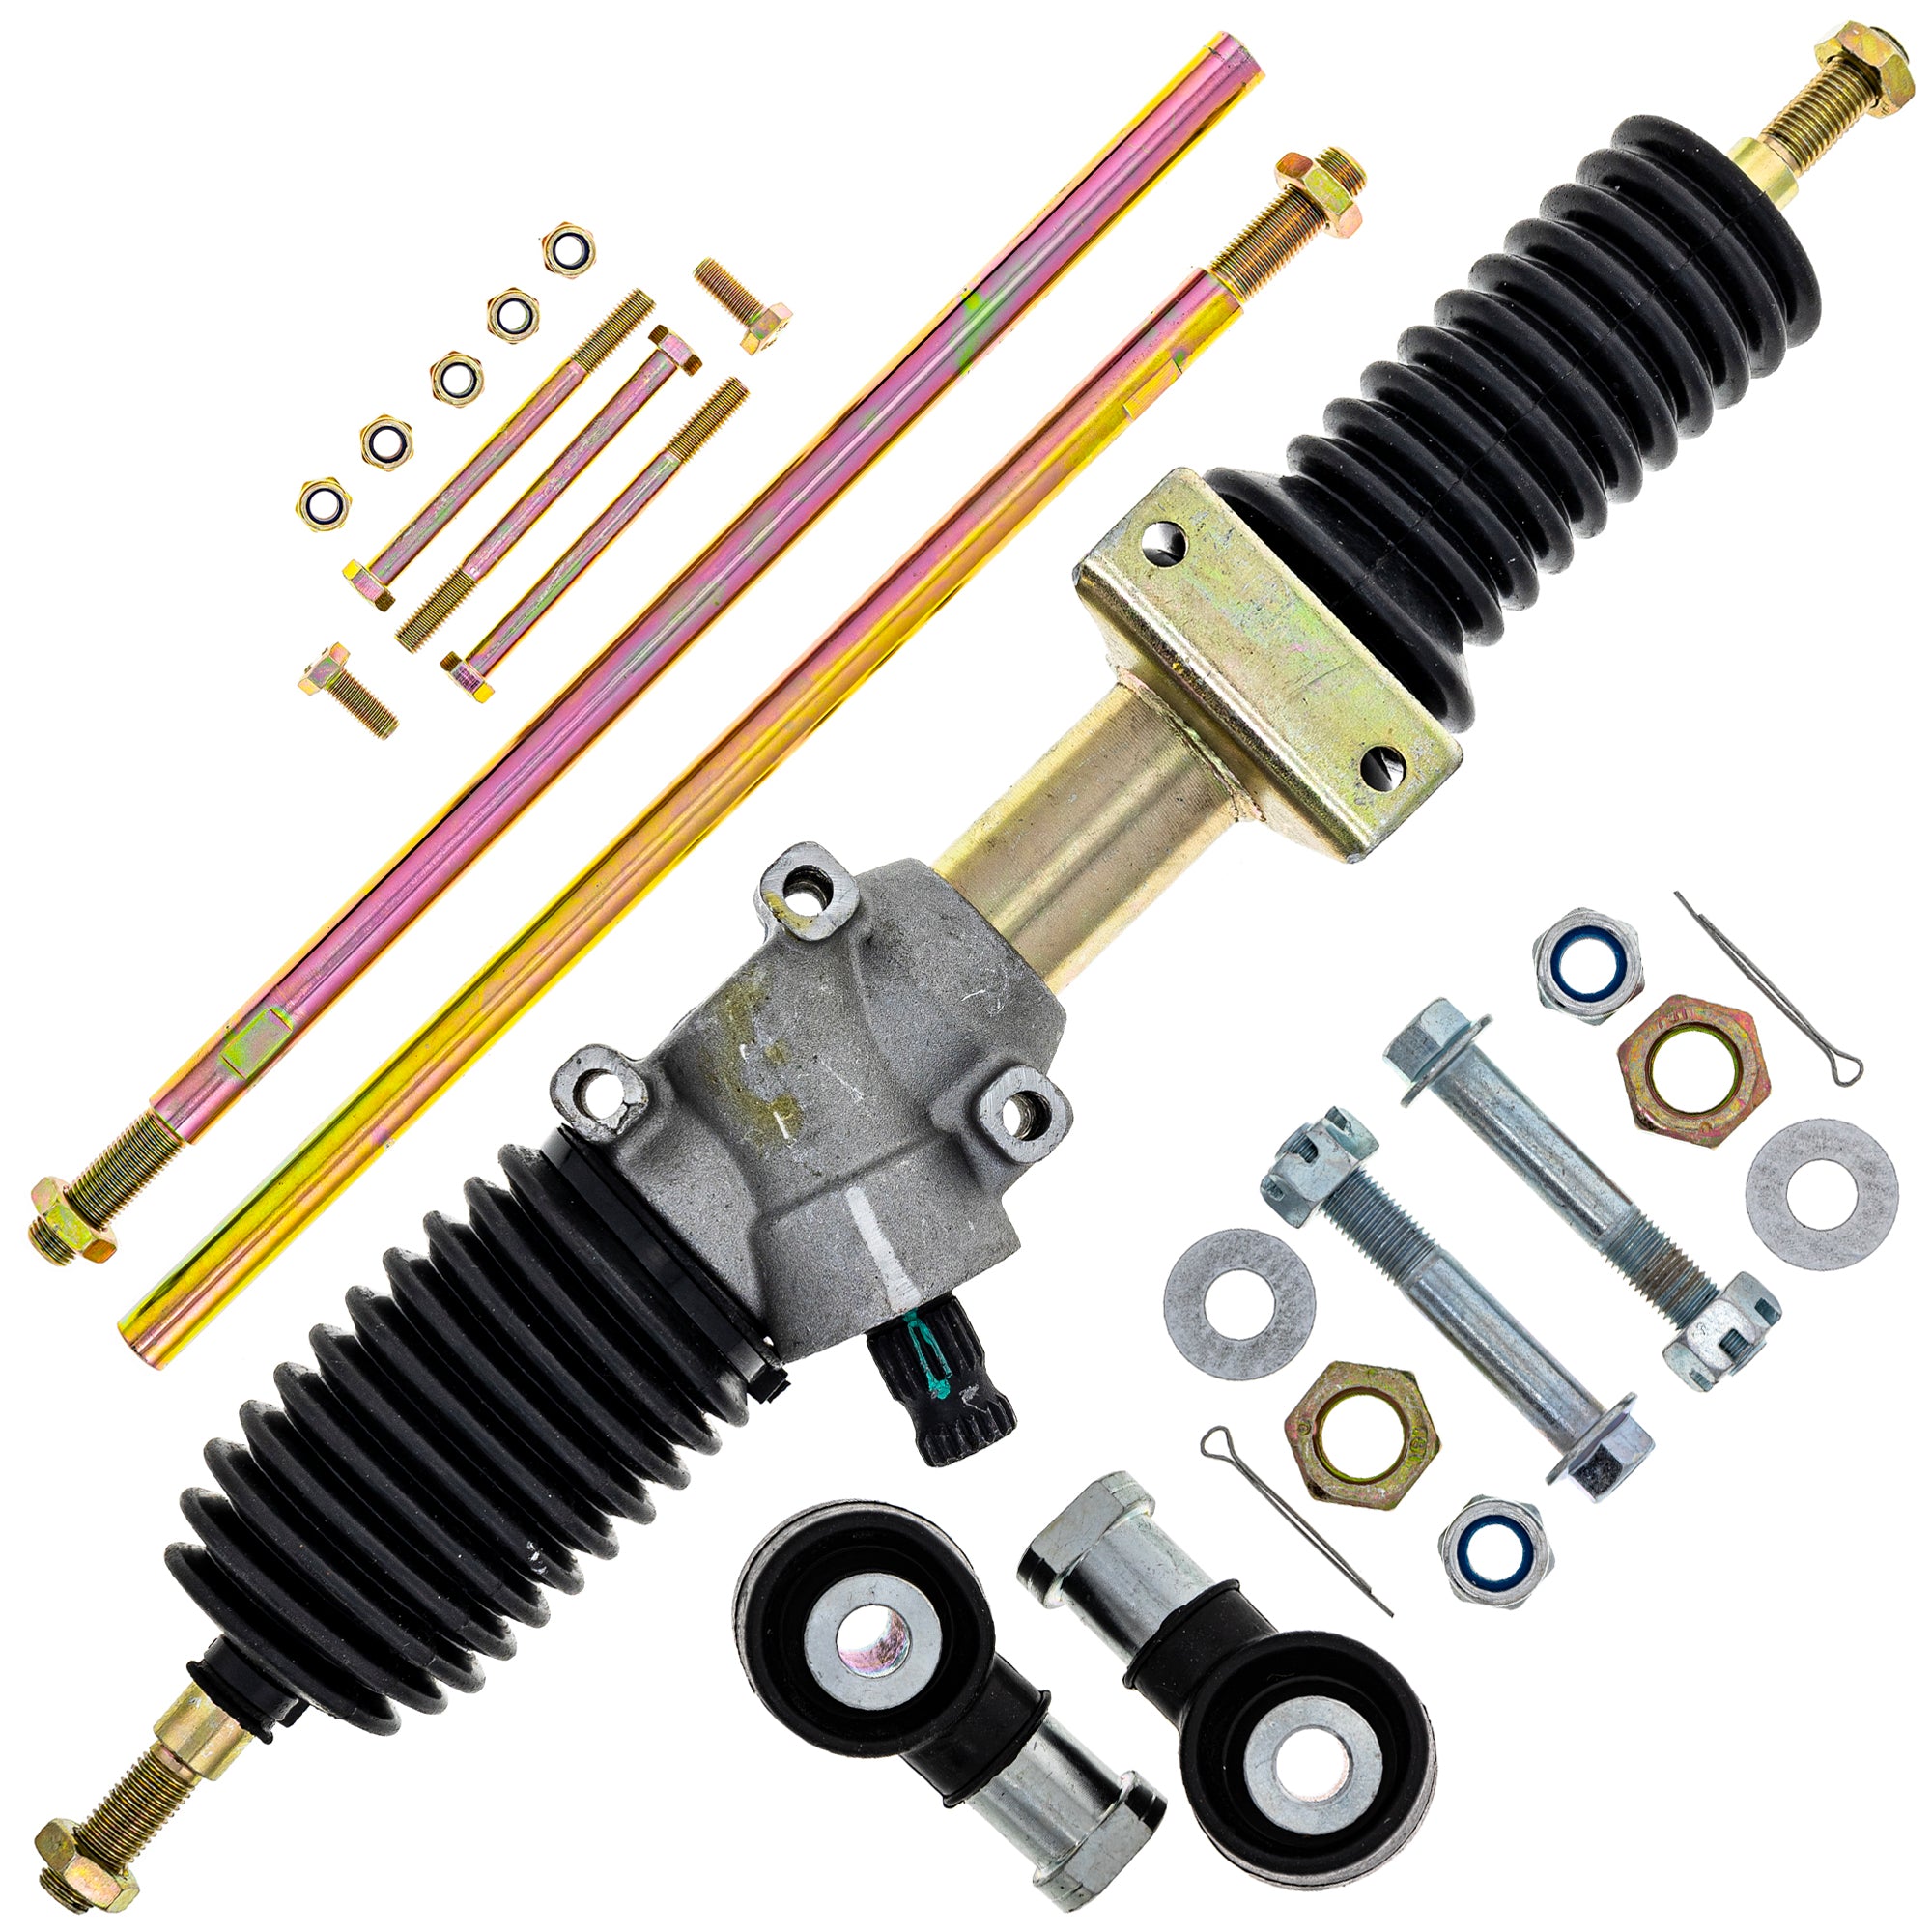 Steering Rack Assembly & Tie Rods Kit for zOTHER Polaris RZR NICHE MK1009501